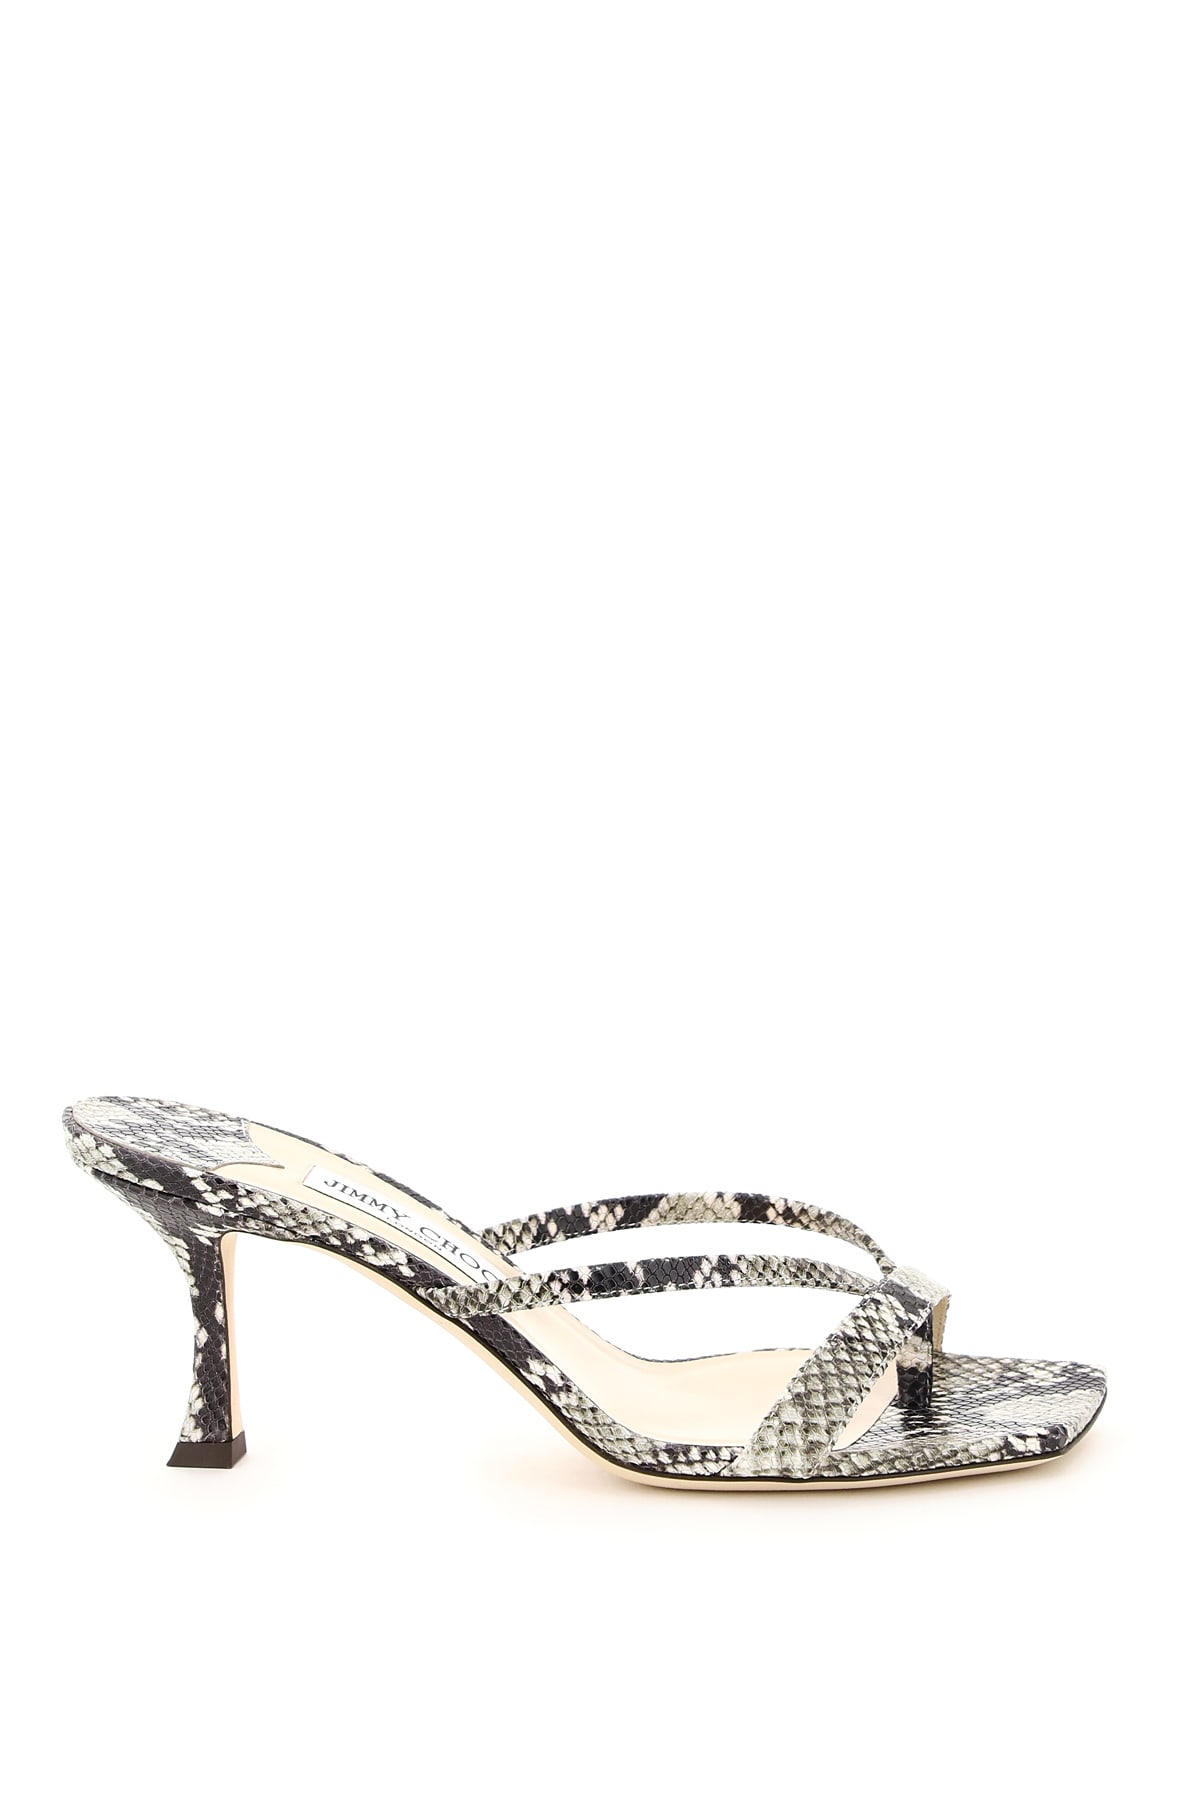 Buy Jimmy Choo Maelie 70 Thong Mules online, shop Jimmy Choo shoes with free shipping